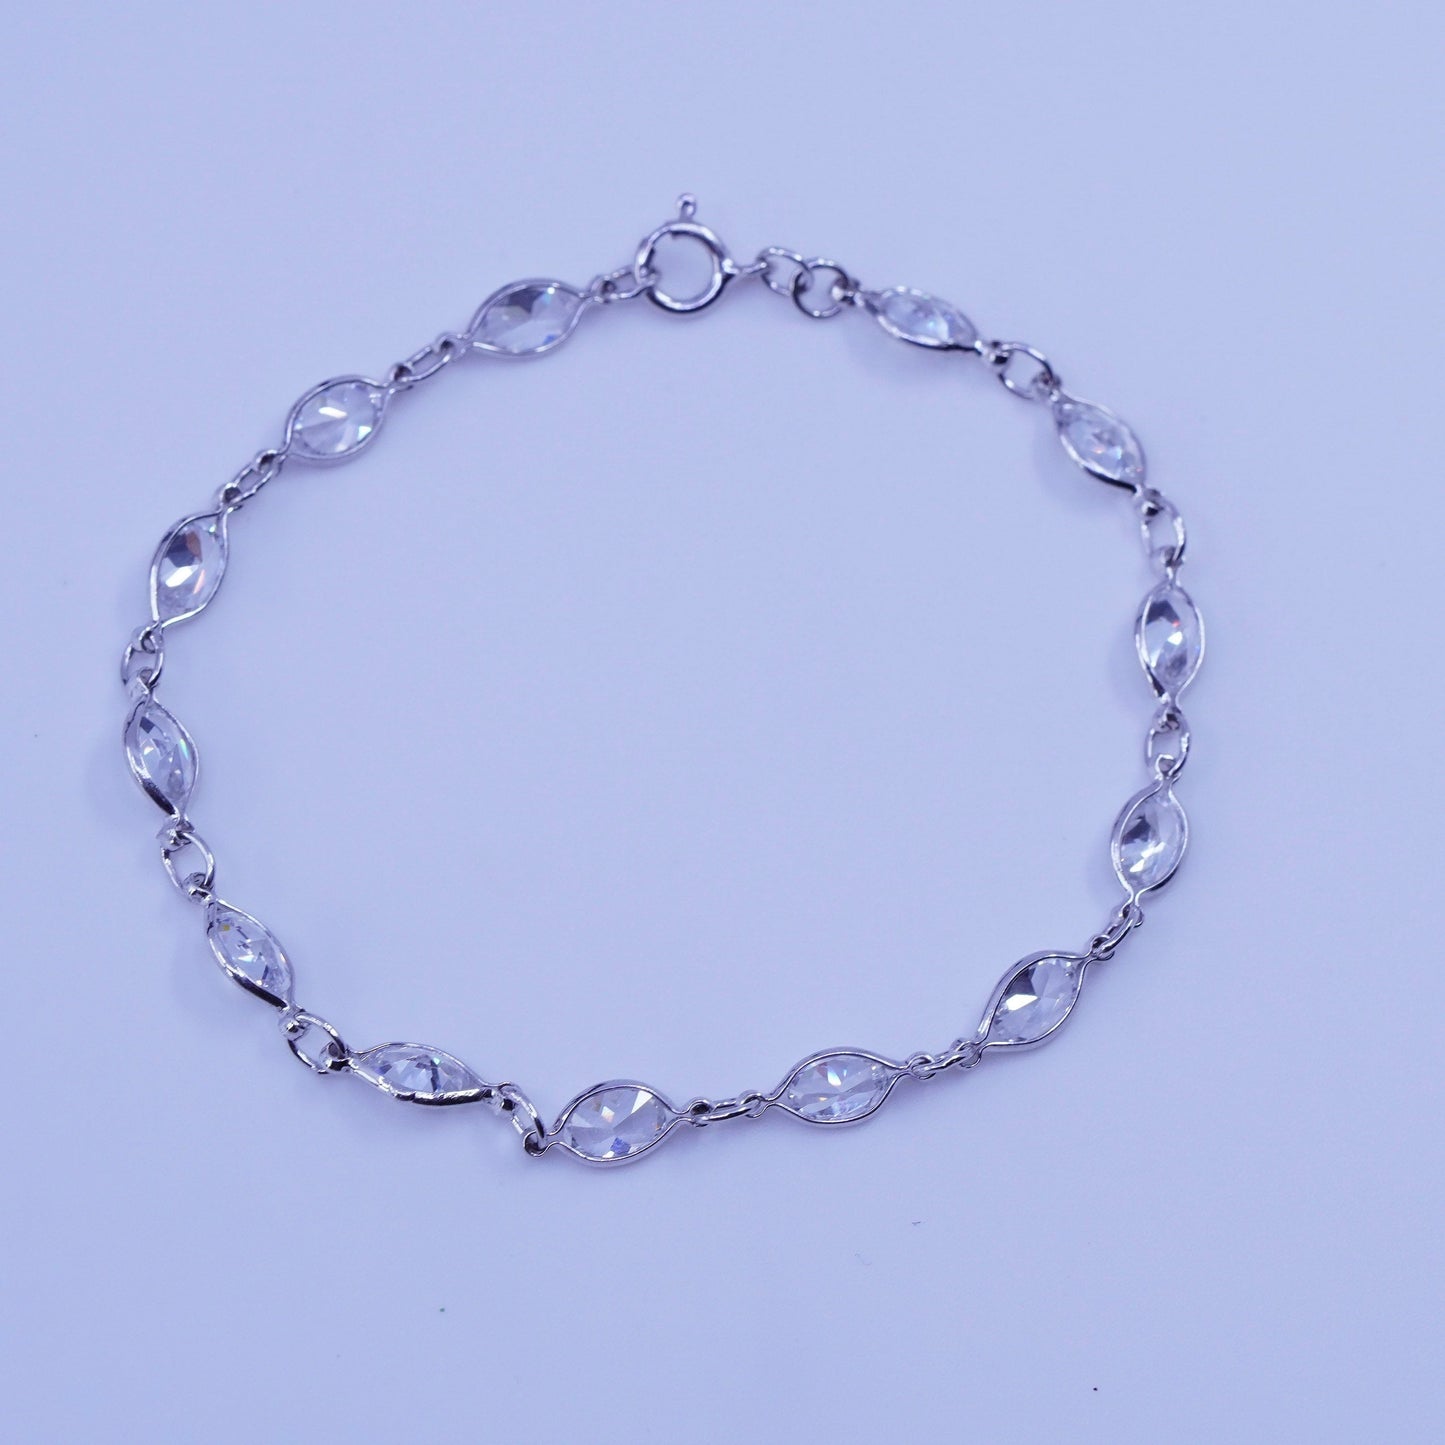 7”, Vintage Italy Sterling 925 silver bracelet chain with Cz inlay